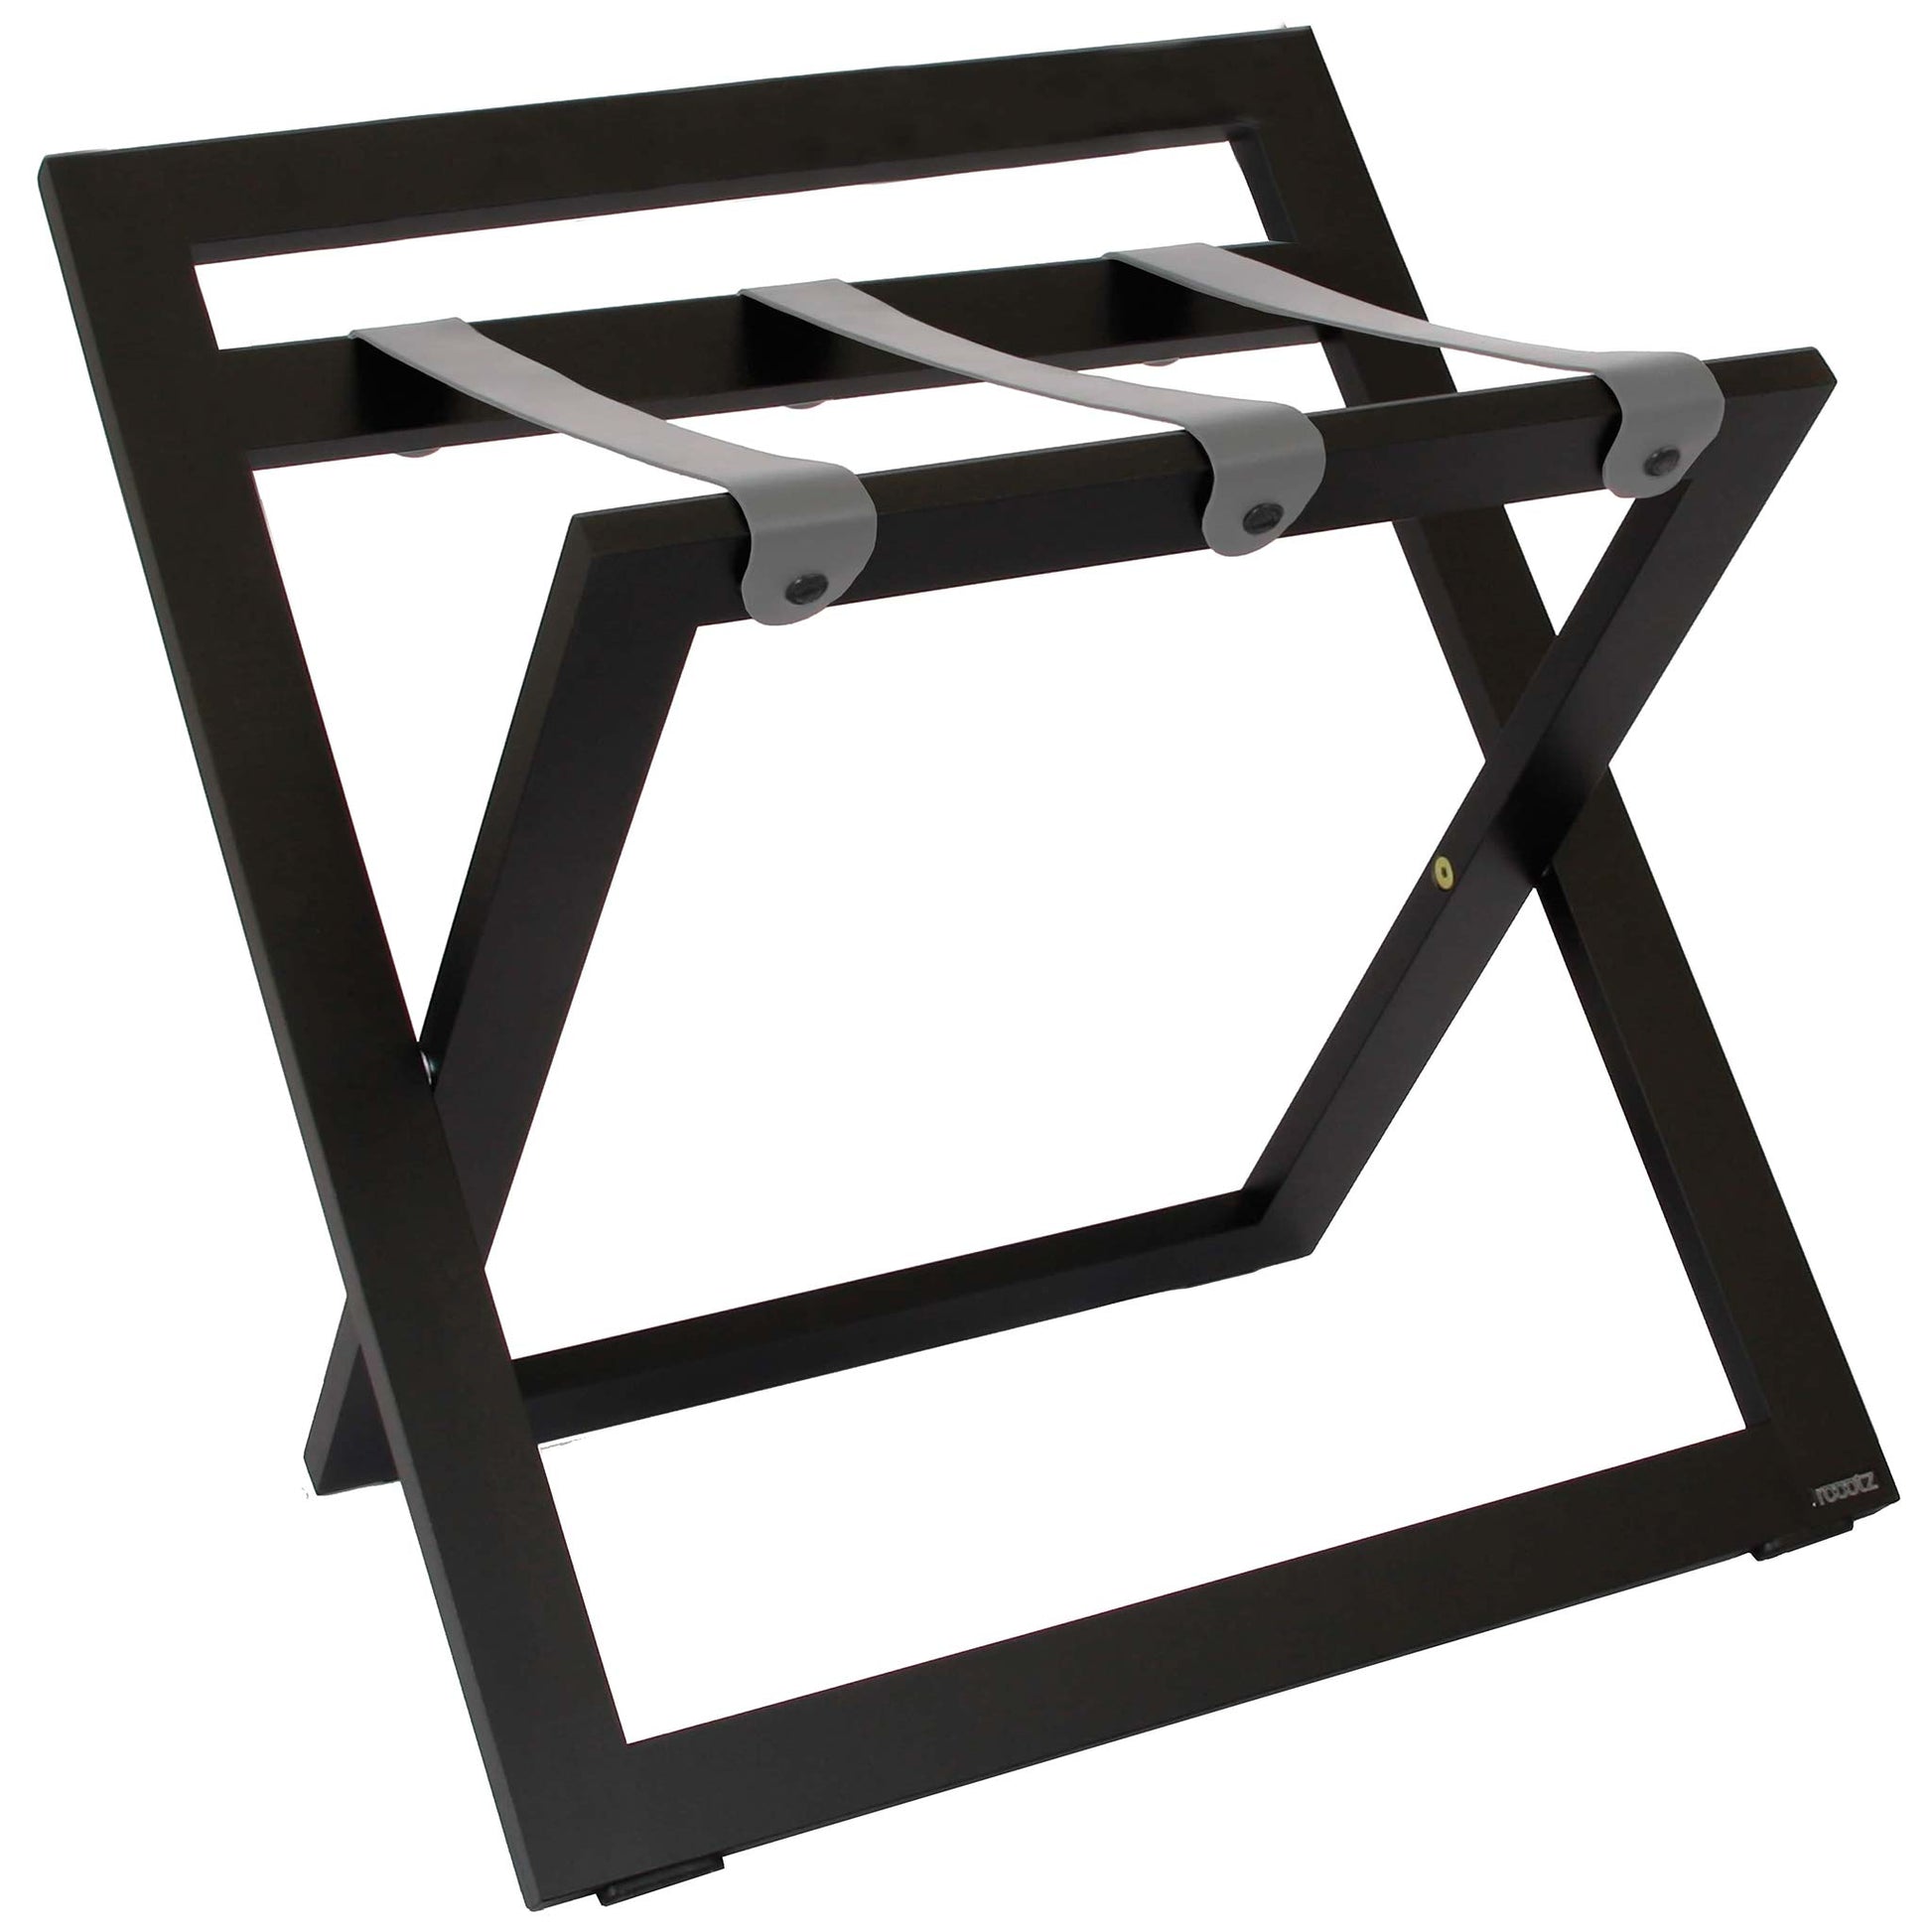 Roootz compact black wooden hotel luggage rack with grey leather straps and backstand